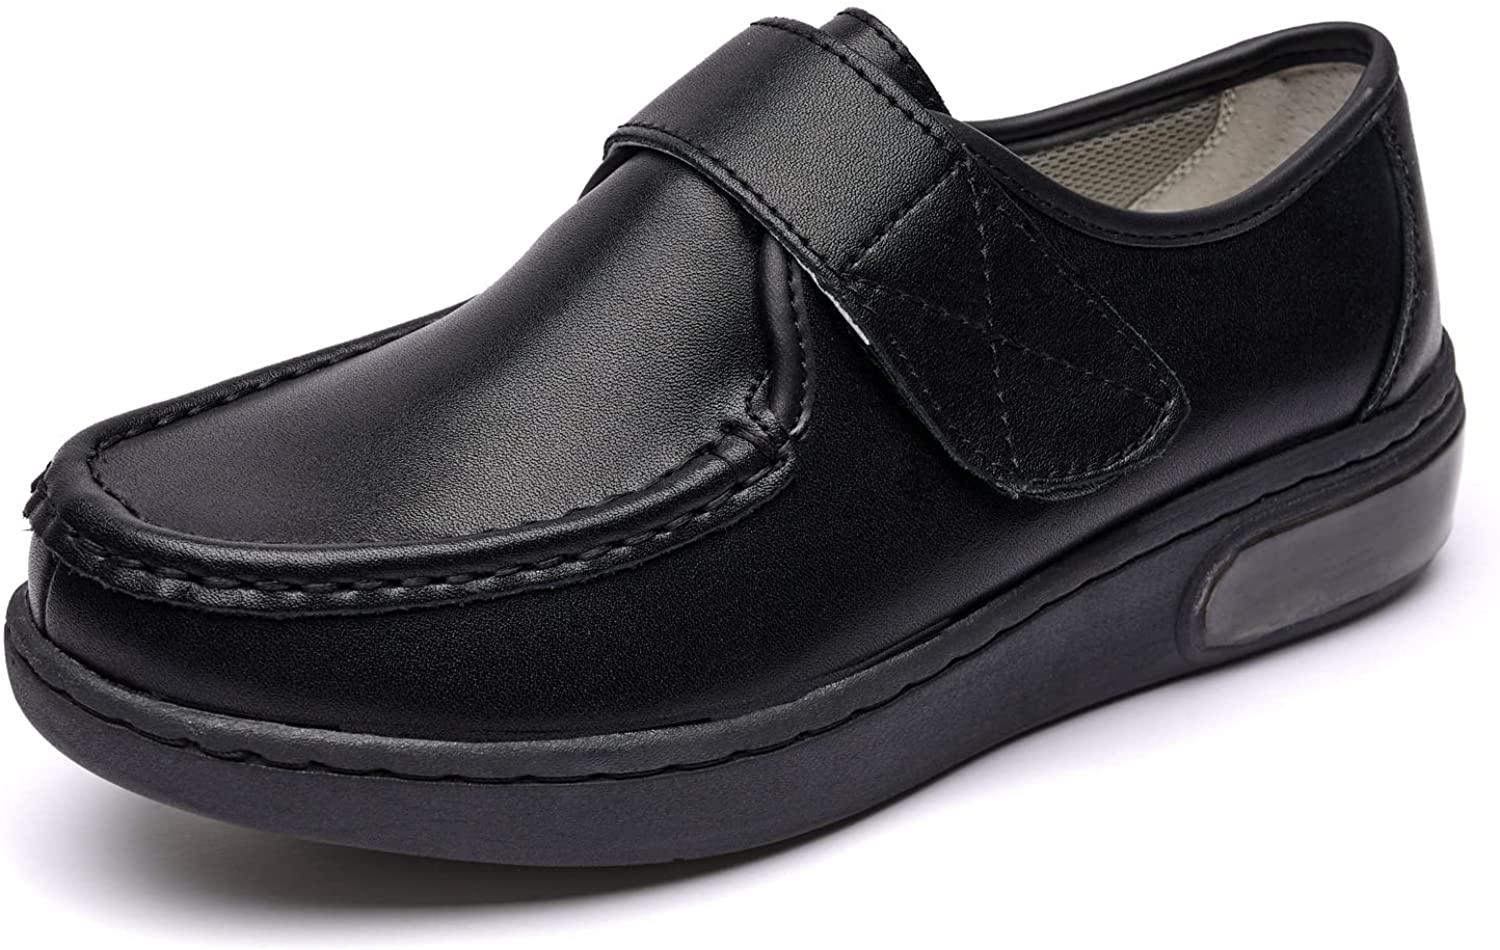 TIOSEBON Women's Comfort Nursing Shoes-Waterproof Slip-Resistant Lightweight Leather Loafers with Hook and Loop for Hospital Healthcare Restaurant Work 